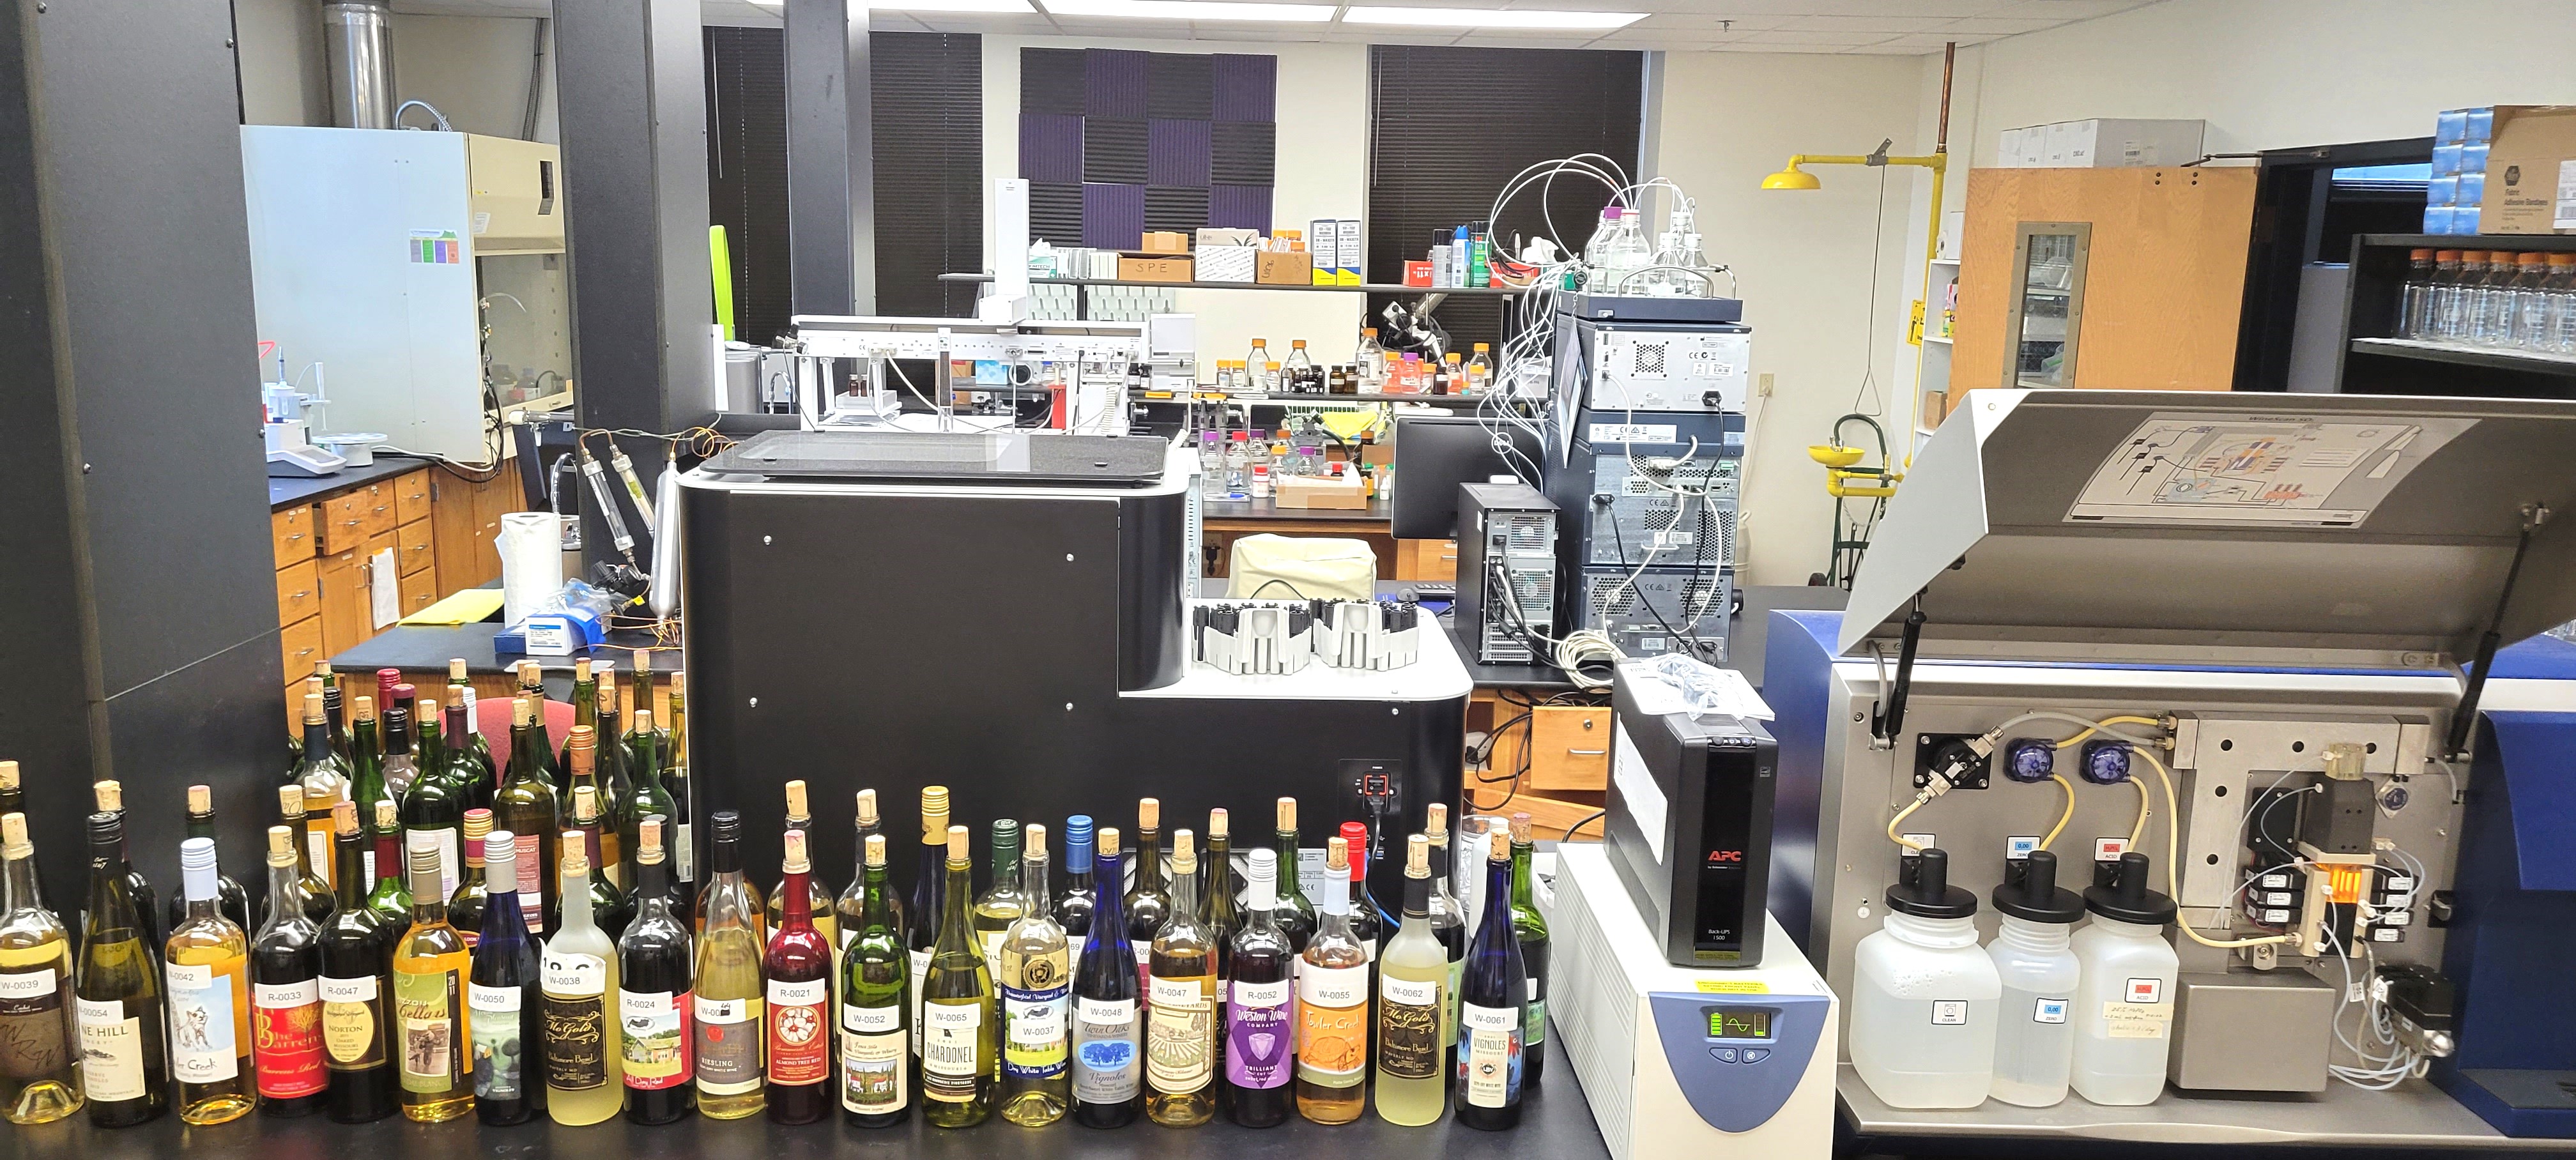 the wine scan machine in the Service Lab with wine bottles lined up next to it